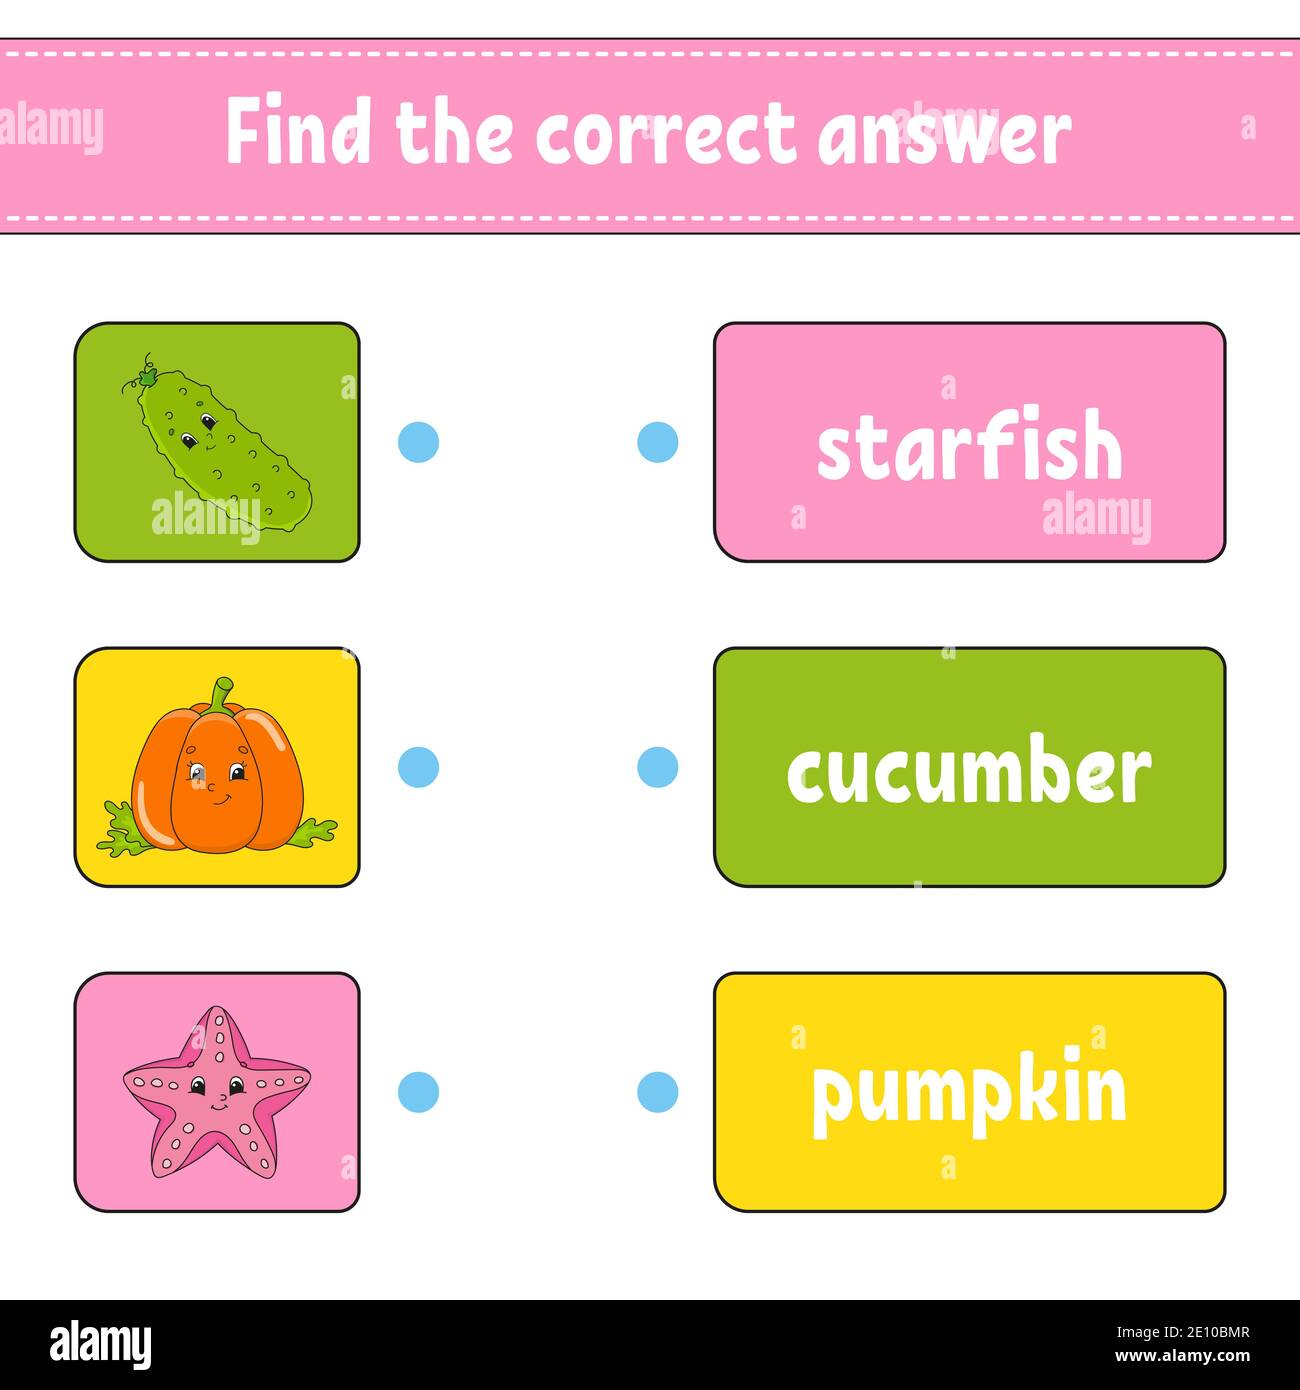 find-the-correct-answer-draw-a-line-learning-words-education-developing-worksheet-activity